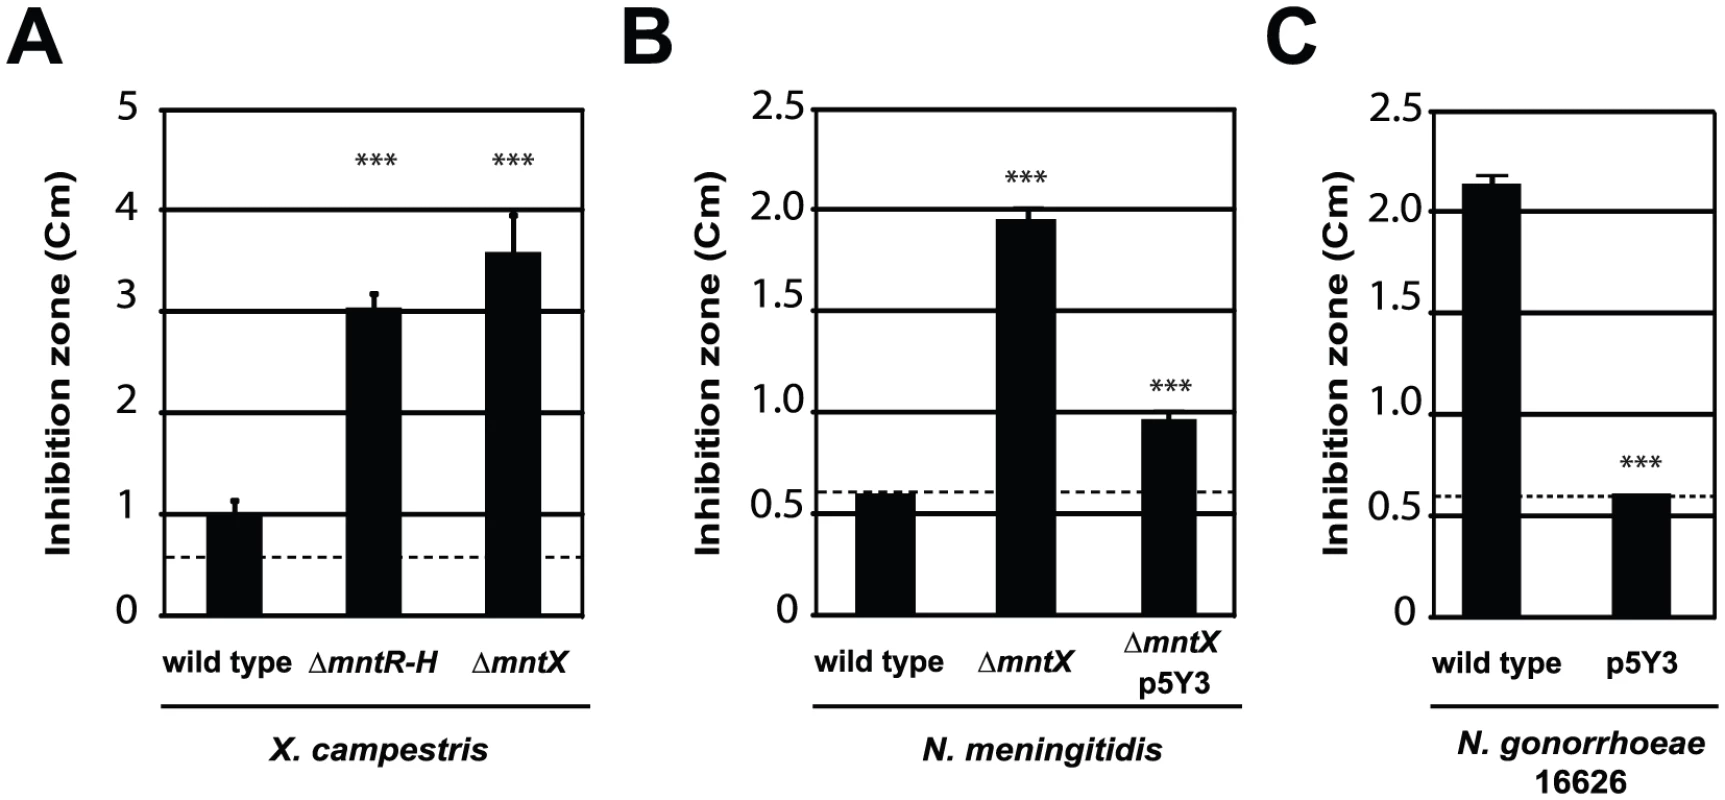 MntX which confers Mn resistance, is often not functional in <i>N. gonorrhoeae</i>.